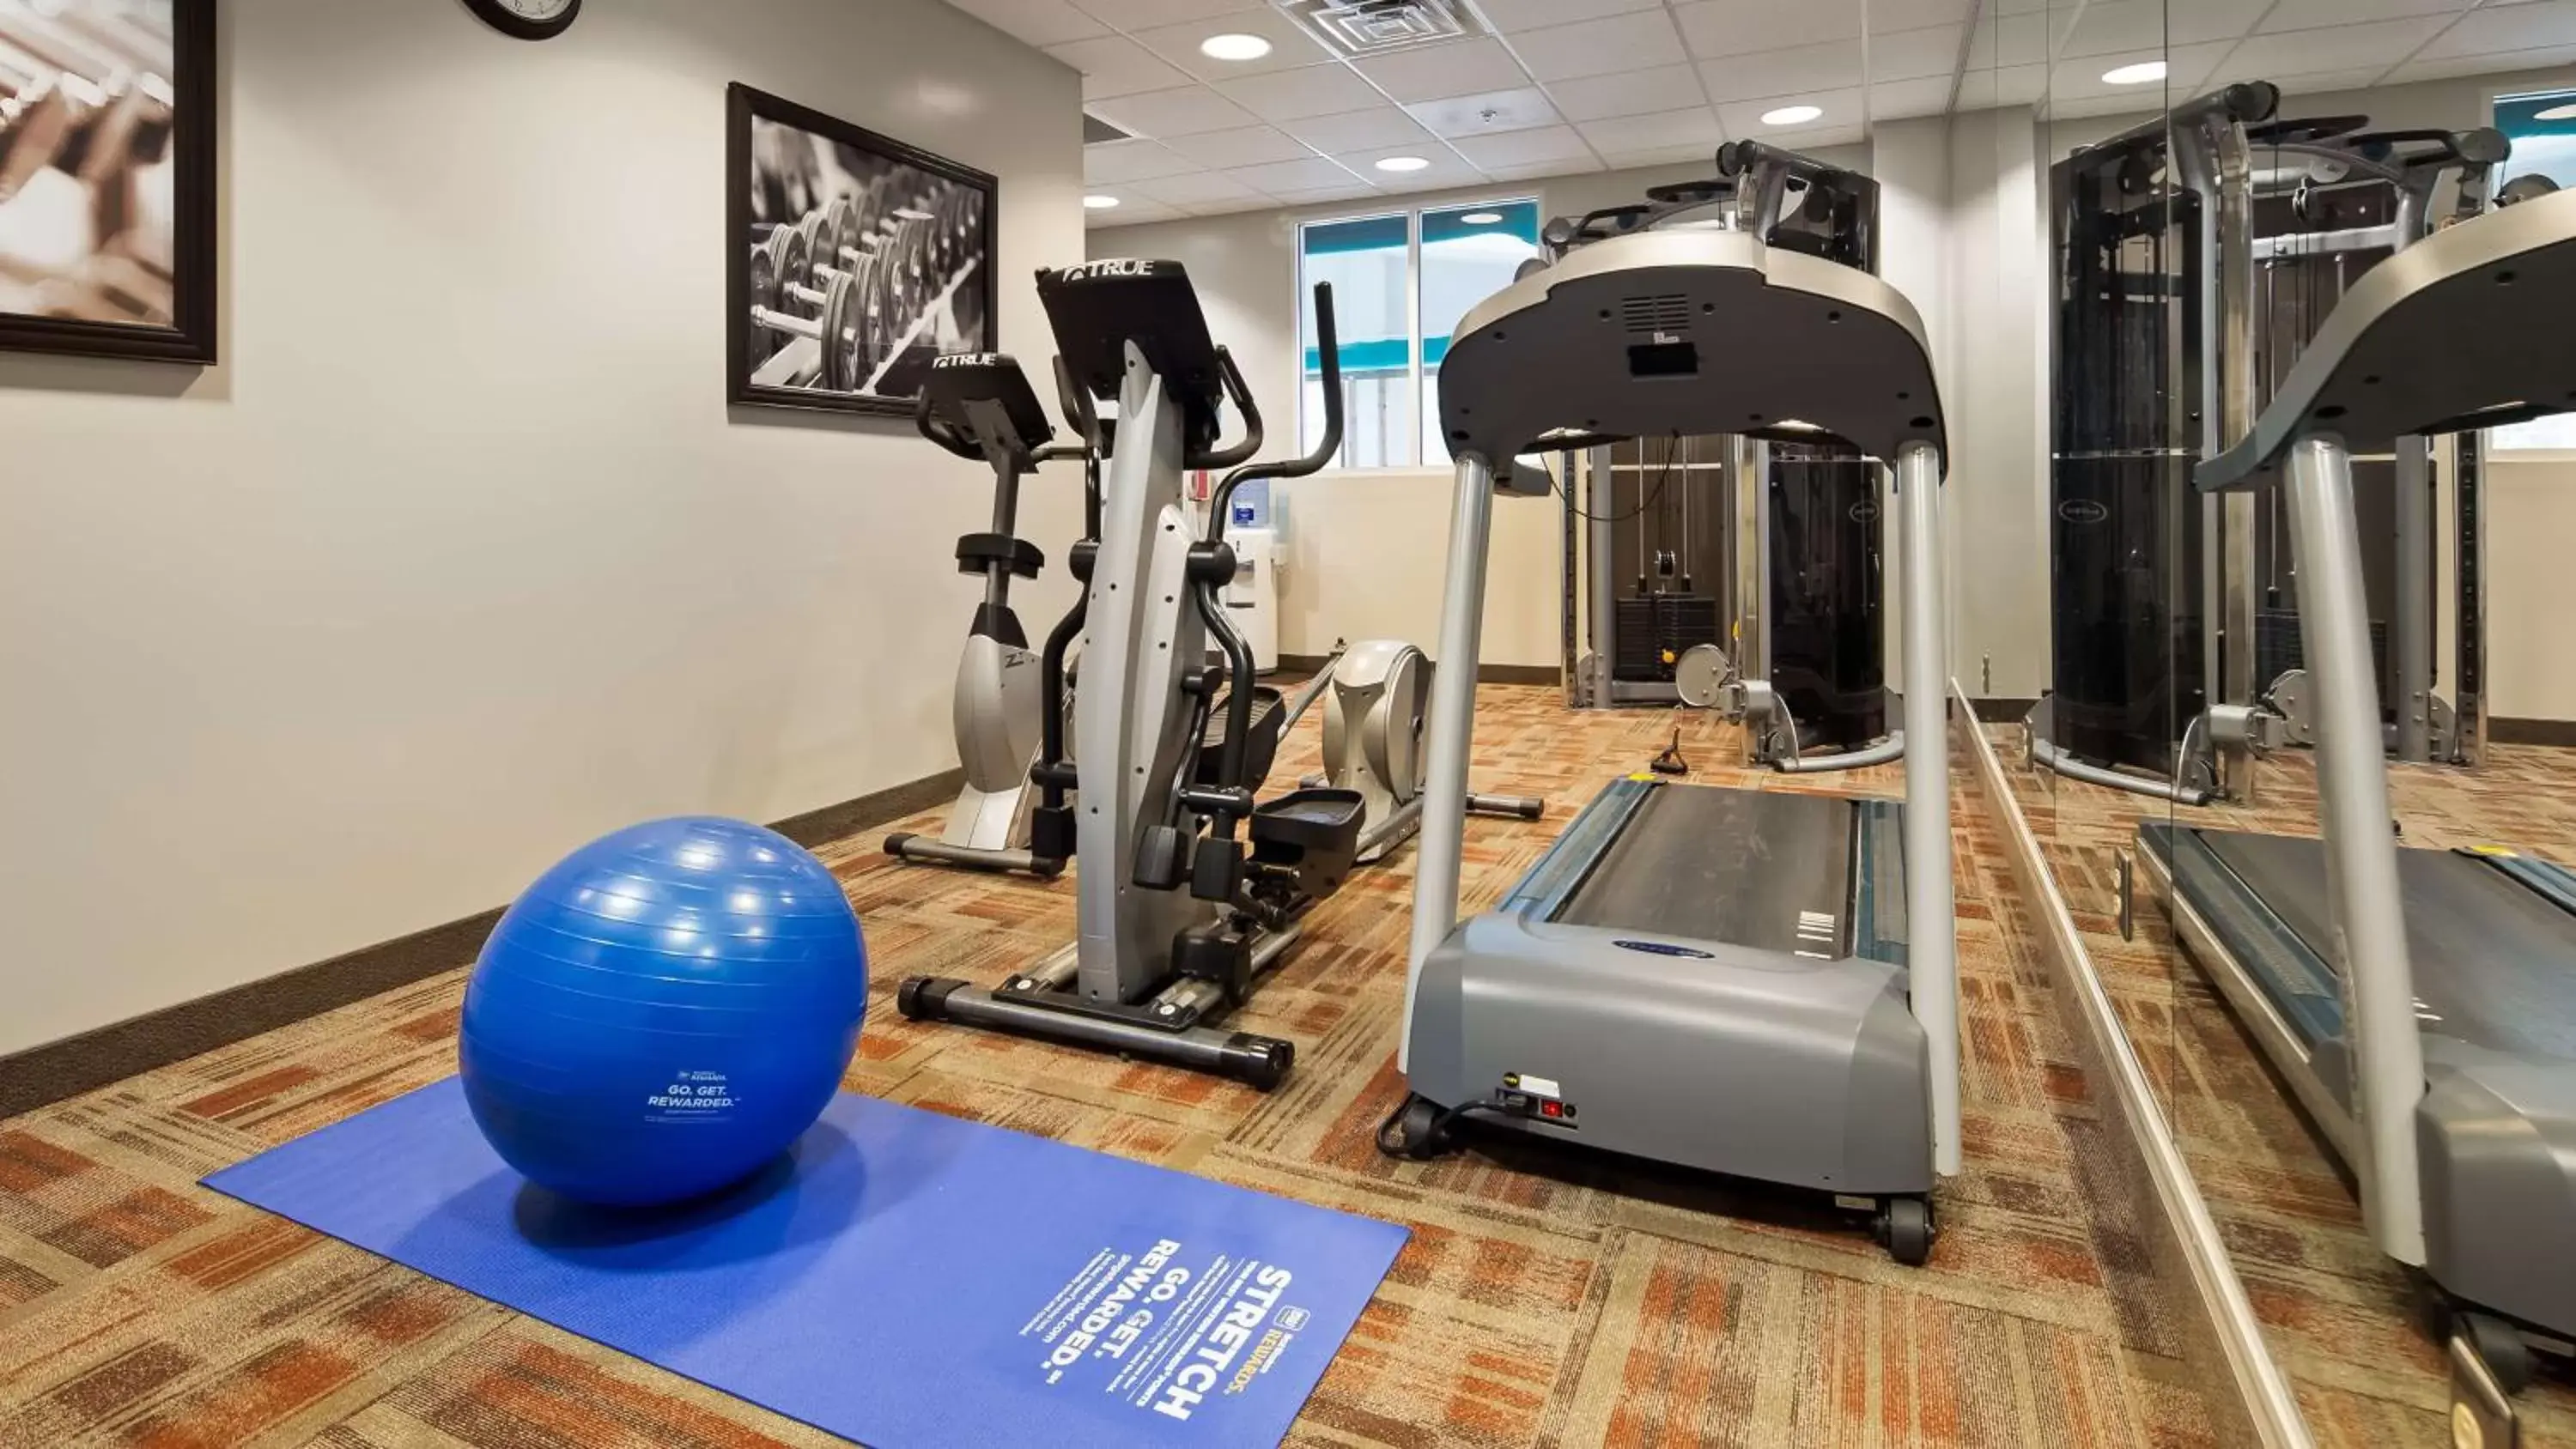 On site, Fitness Center/Facilities in Best Western Plus Crossroads Inn & Suites